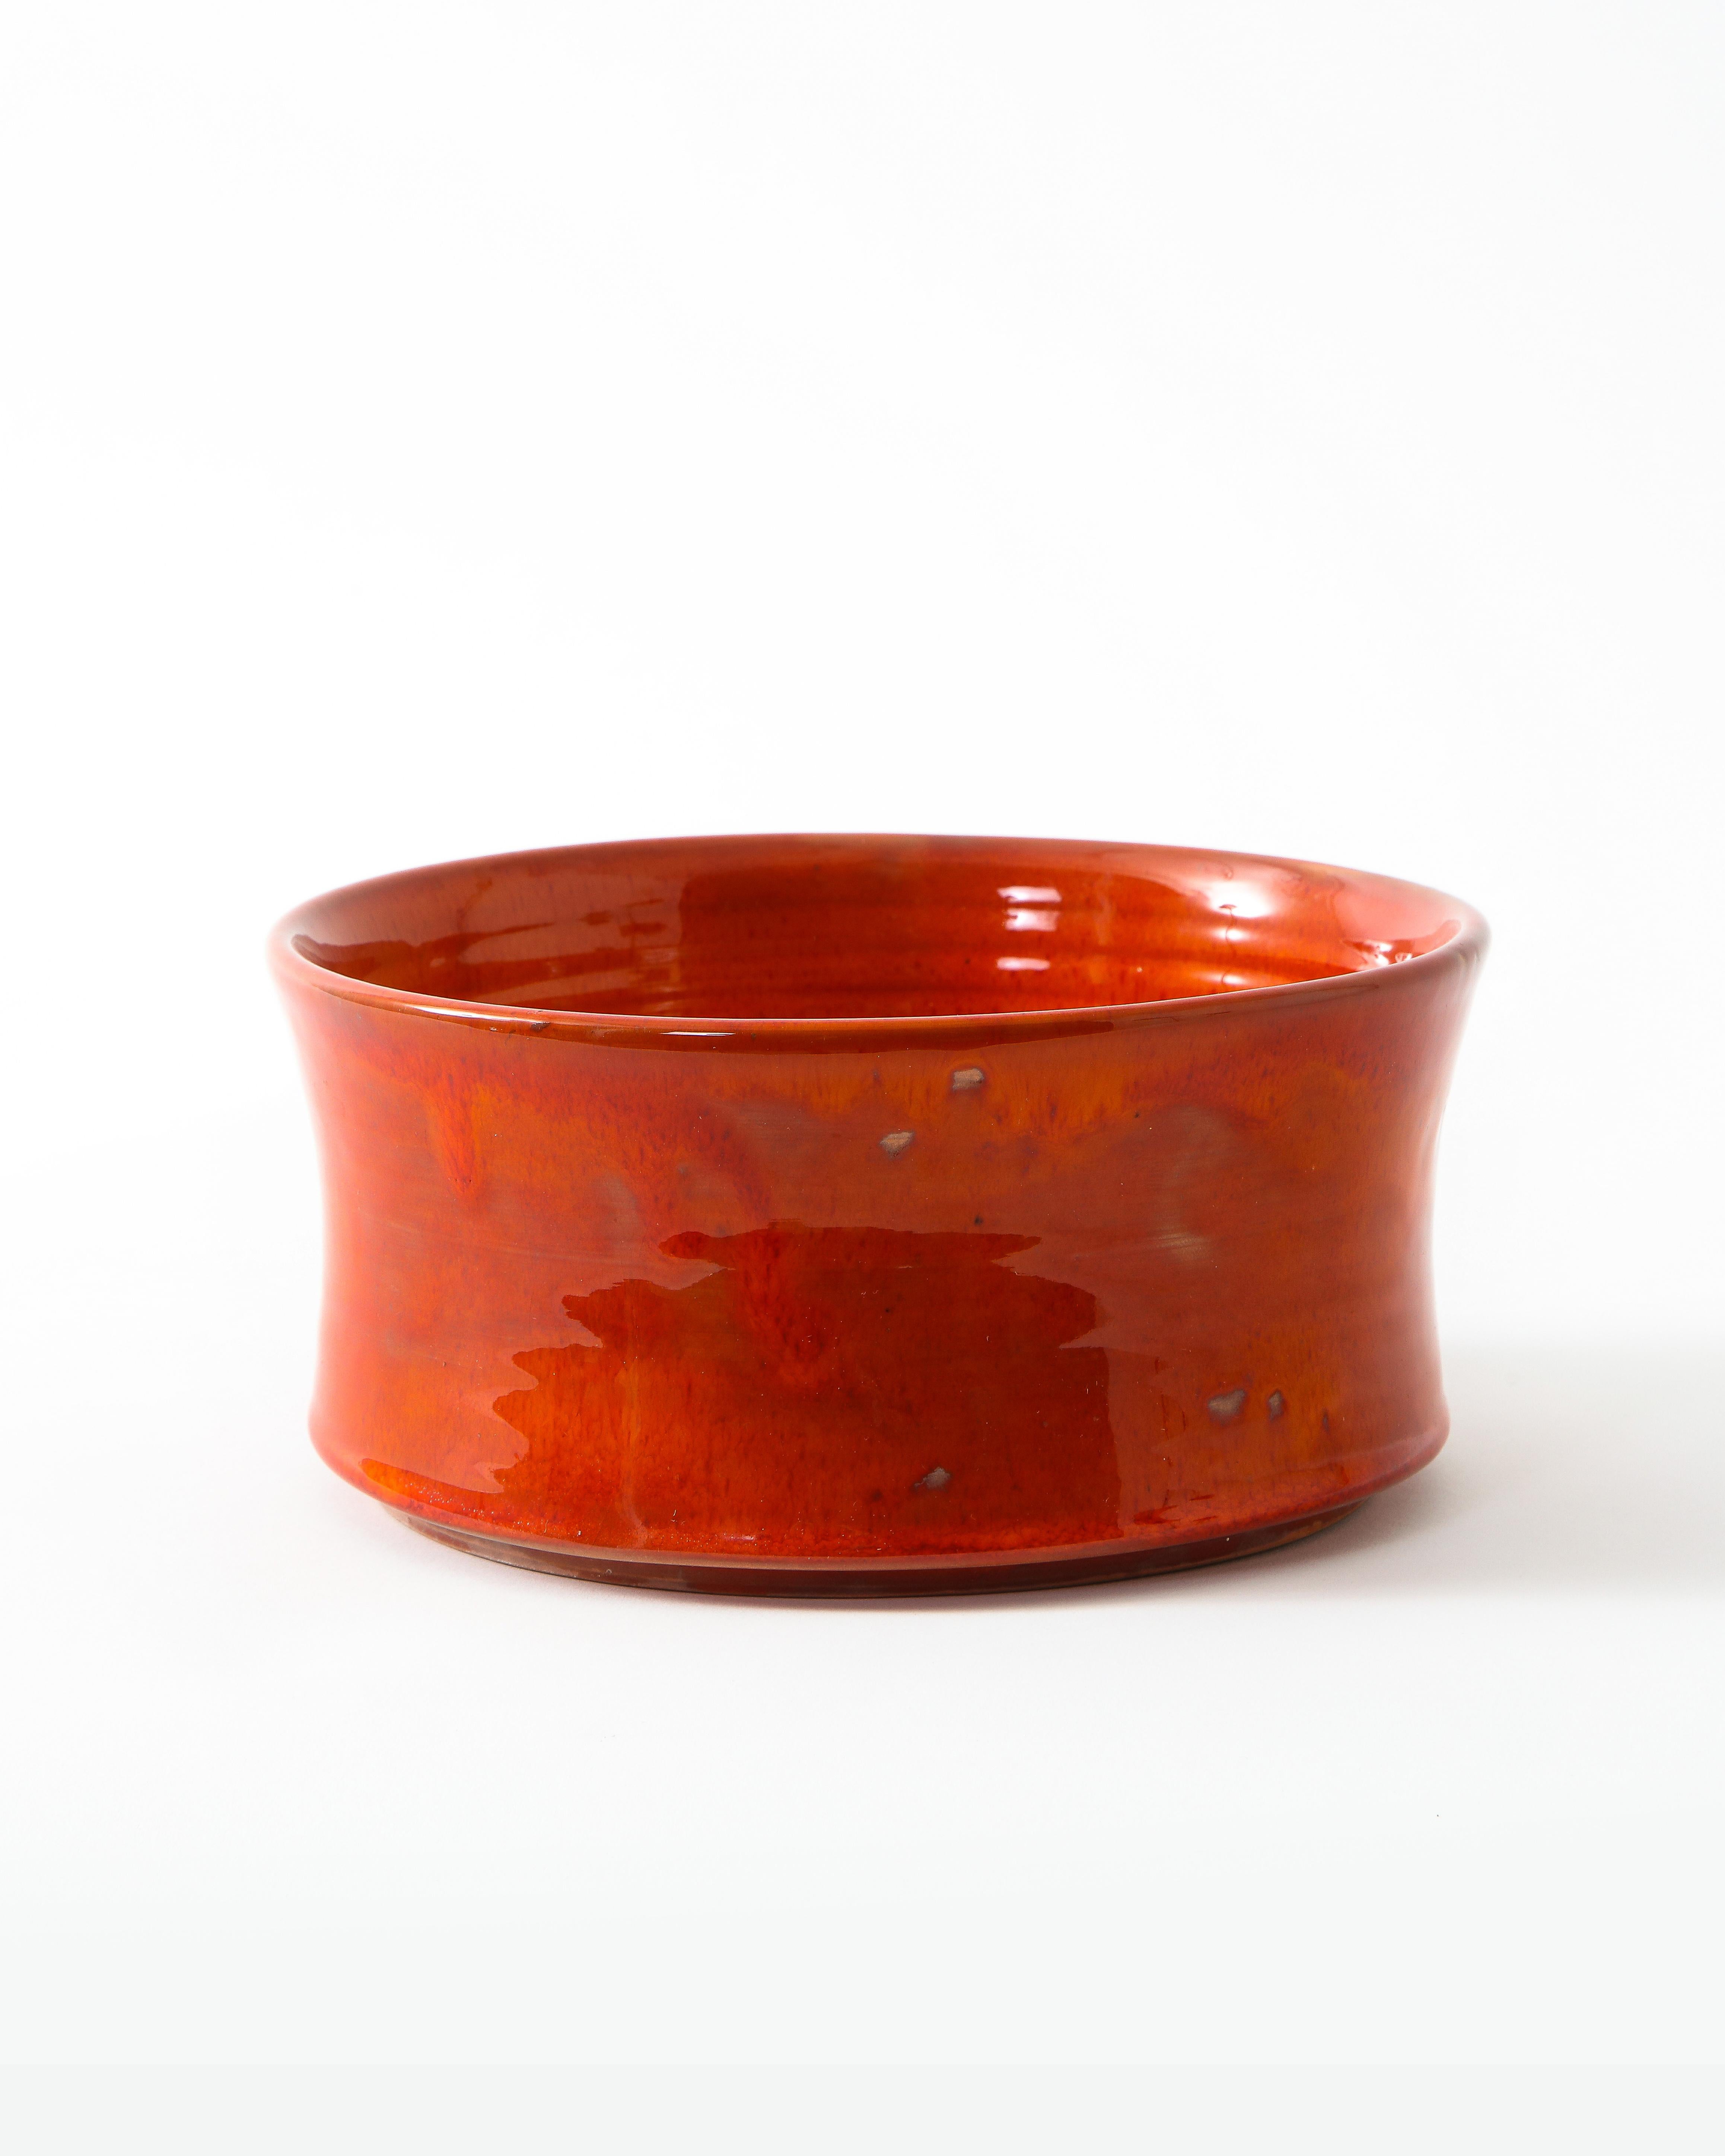 Ceramic Red Bowl by Robert and Jean Cloutier, France, 1970s For Sale